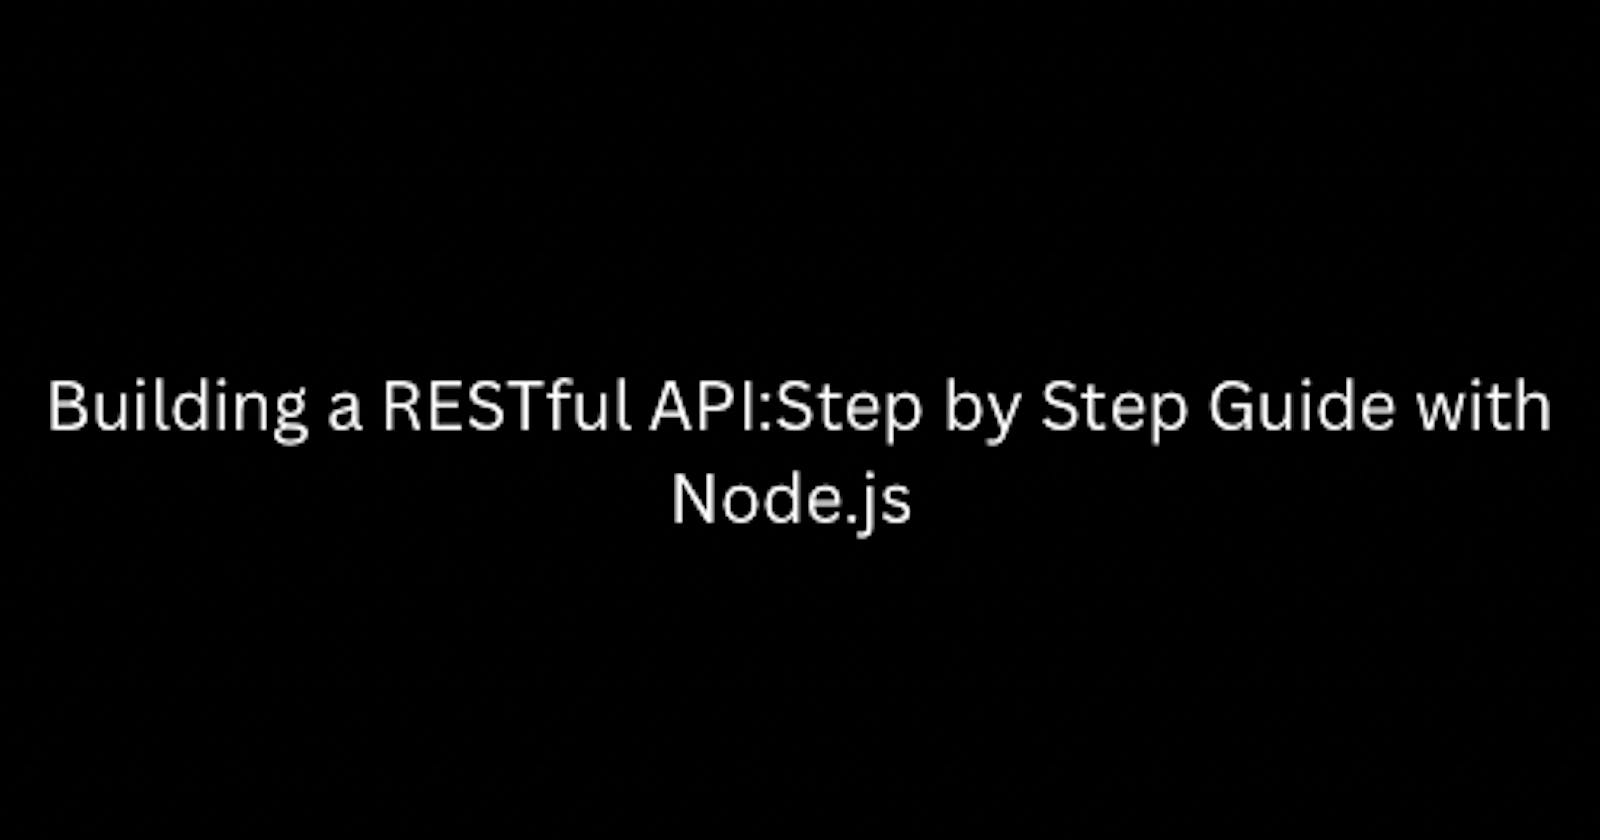 Building a RESTful API: Step-by-Step Guide with Node.js